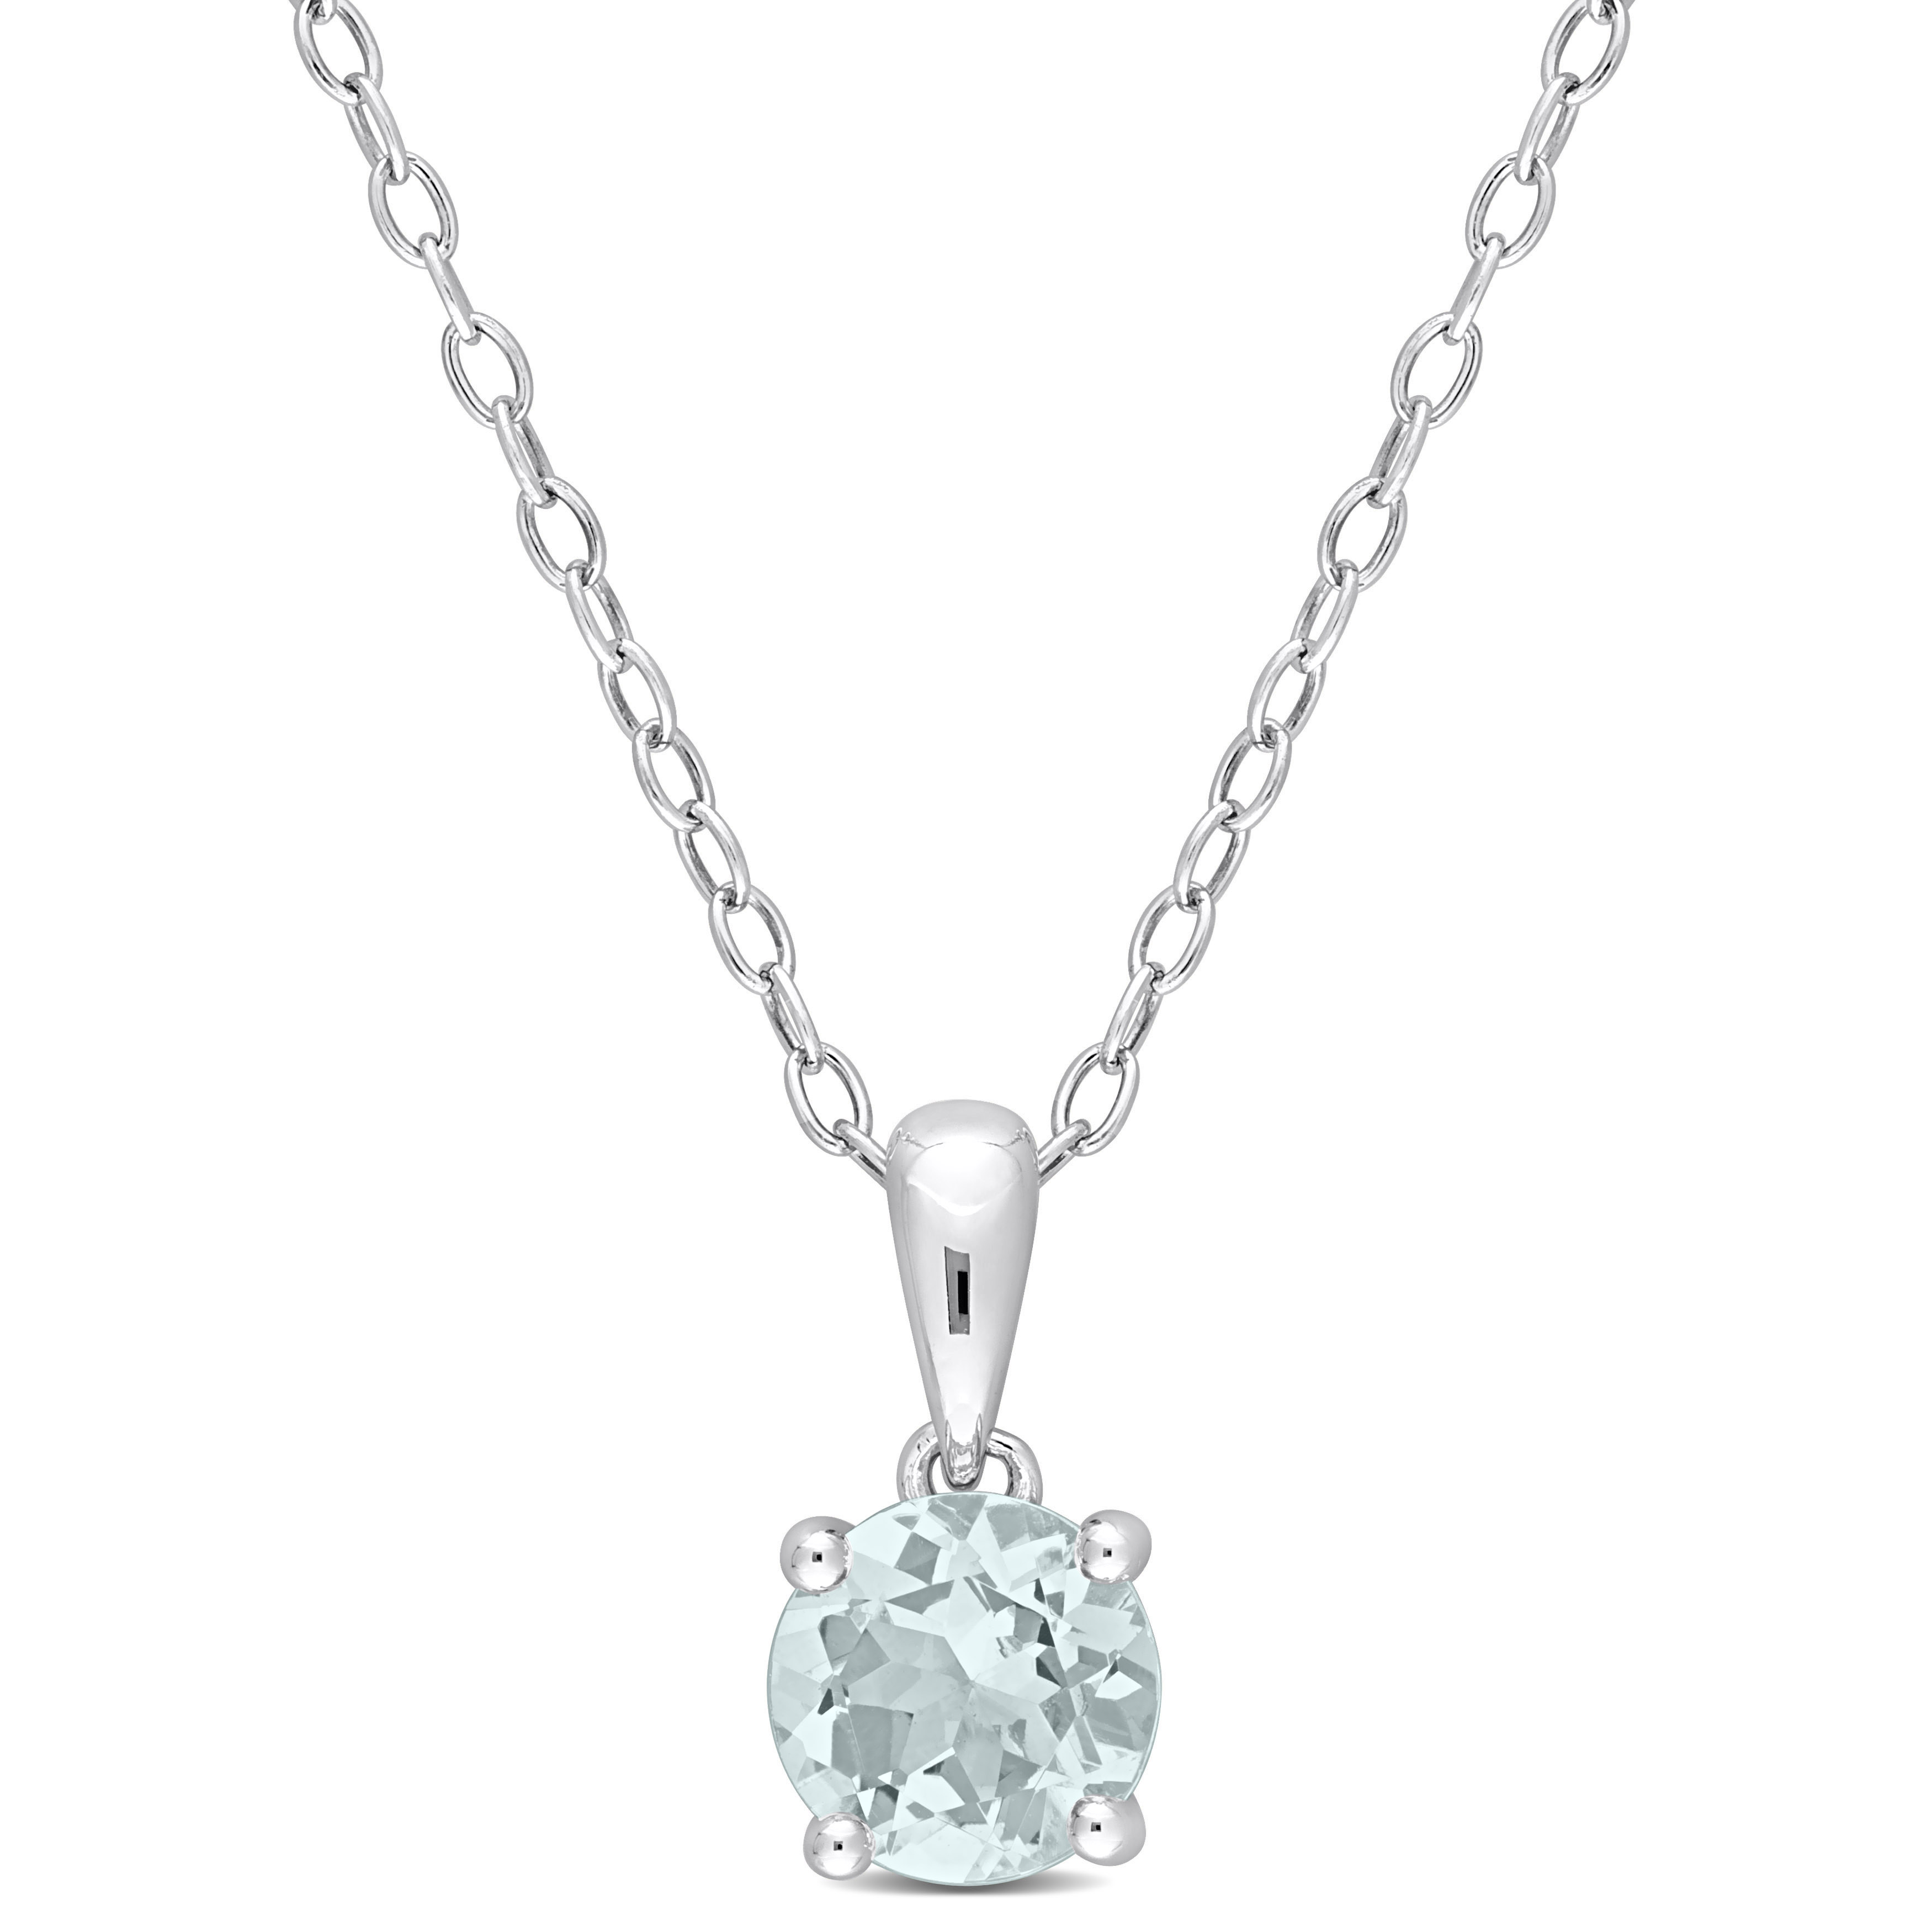 3/4 CT TGW Aquamarine Solitaire Heart Design Pendant with Chain in Sterling Silver - 18 in.